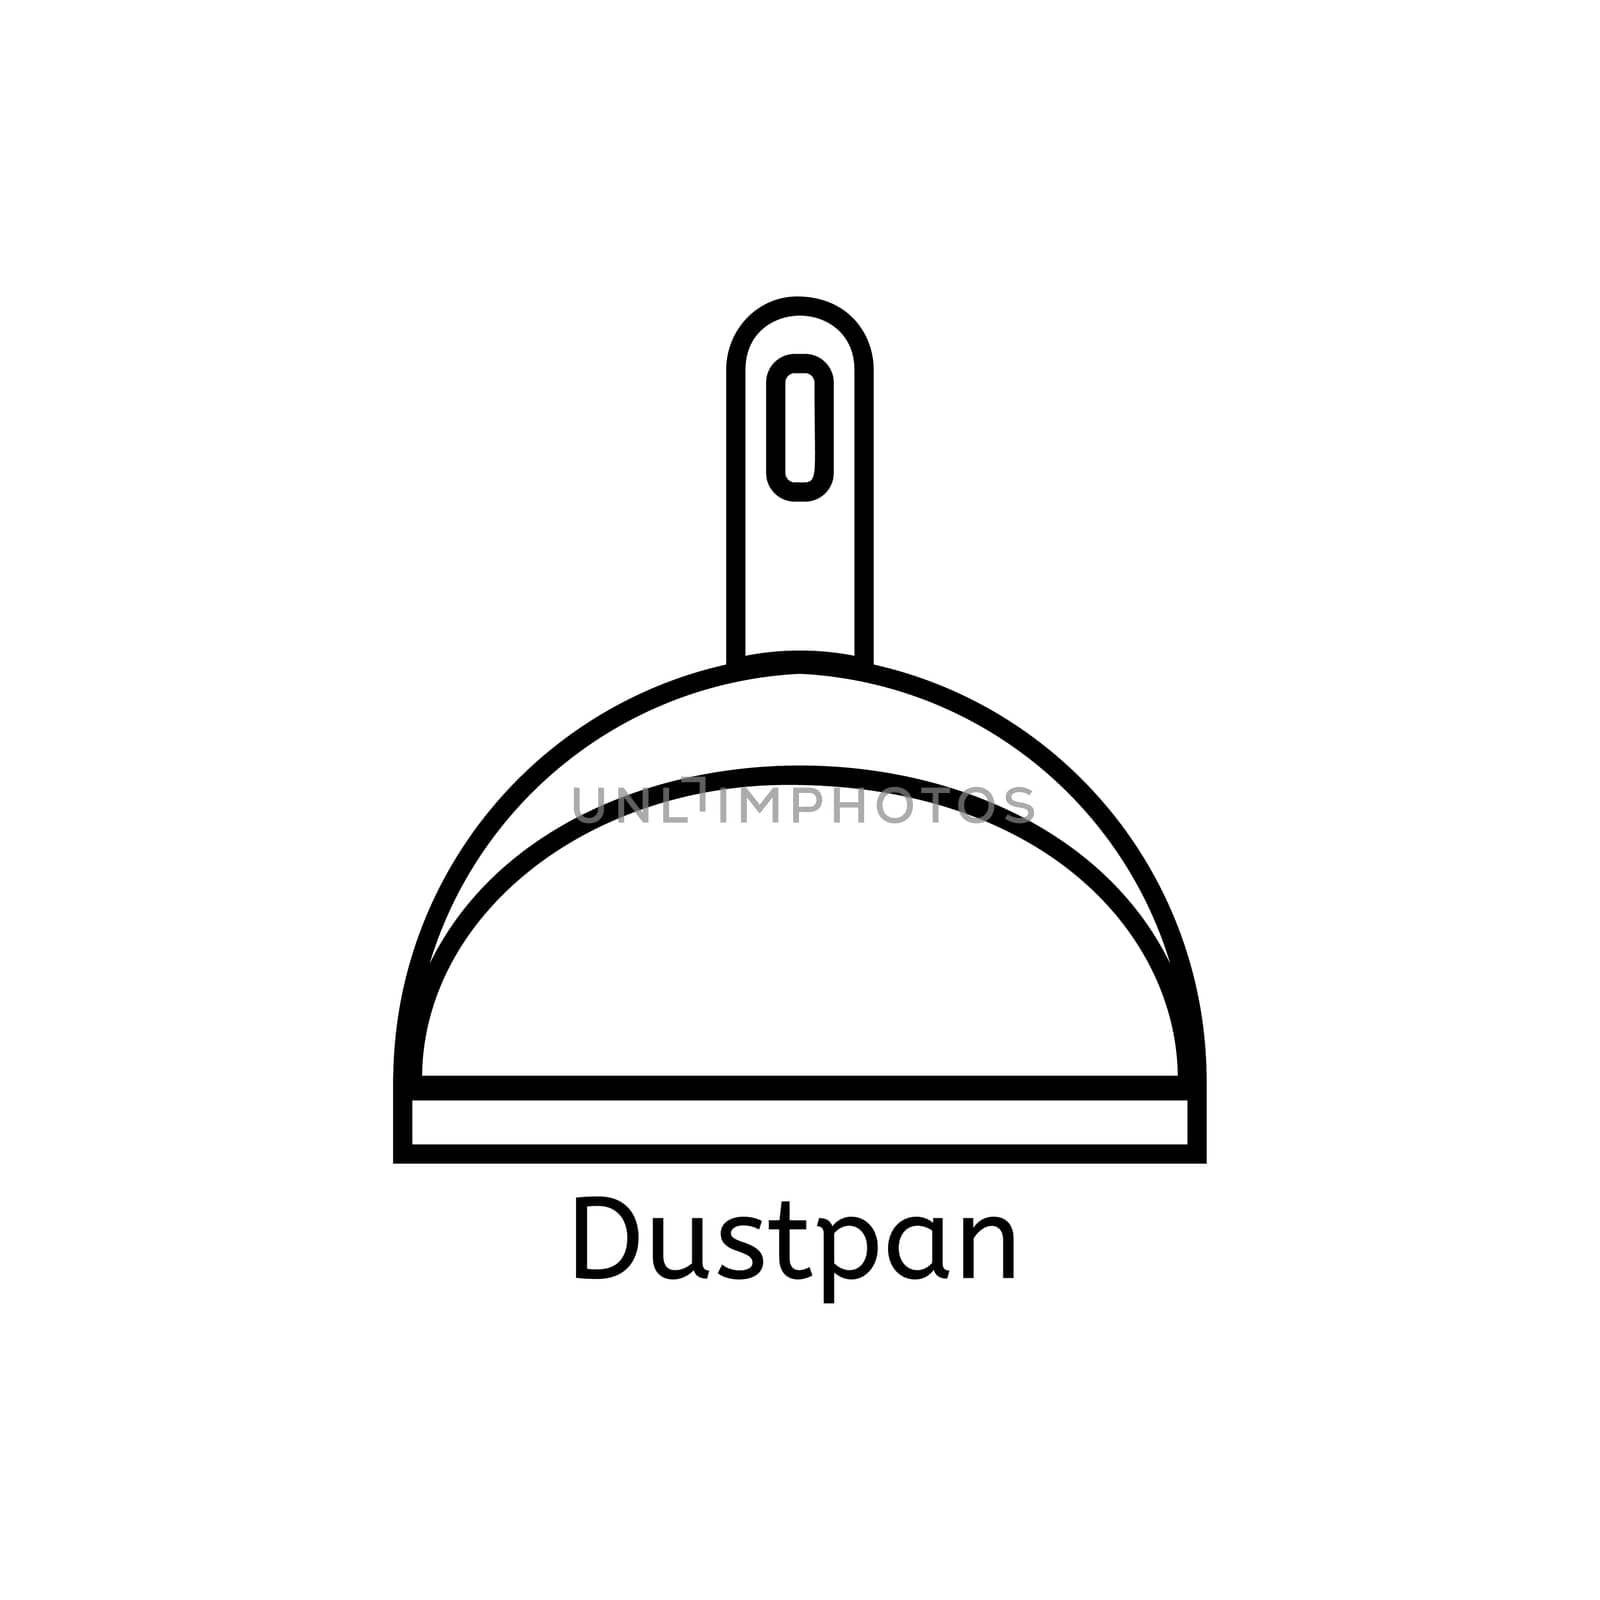 Dustpan simple line icon. Cleaning thin linear signs. Simple concept for websites, infographic, mobile app.